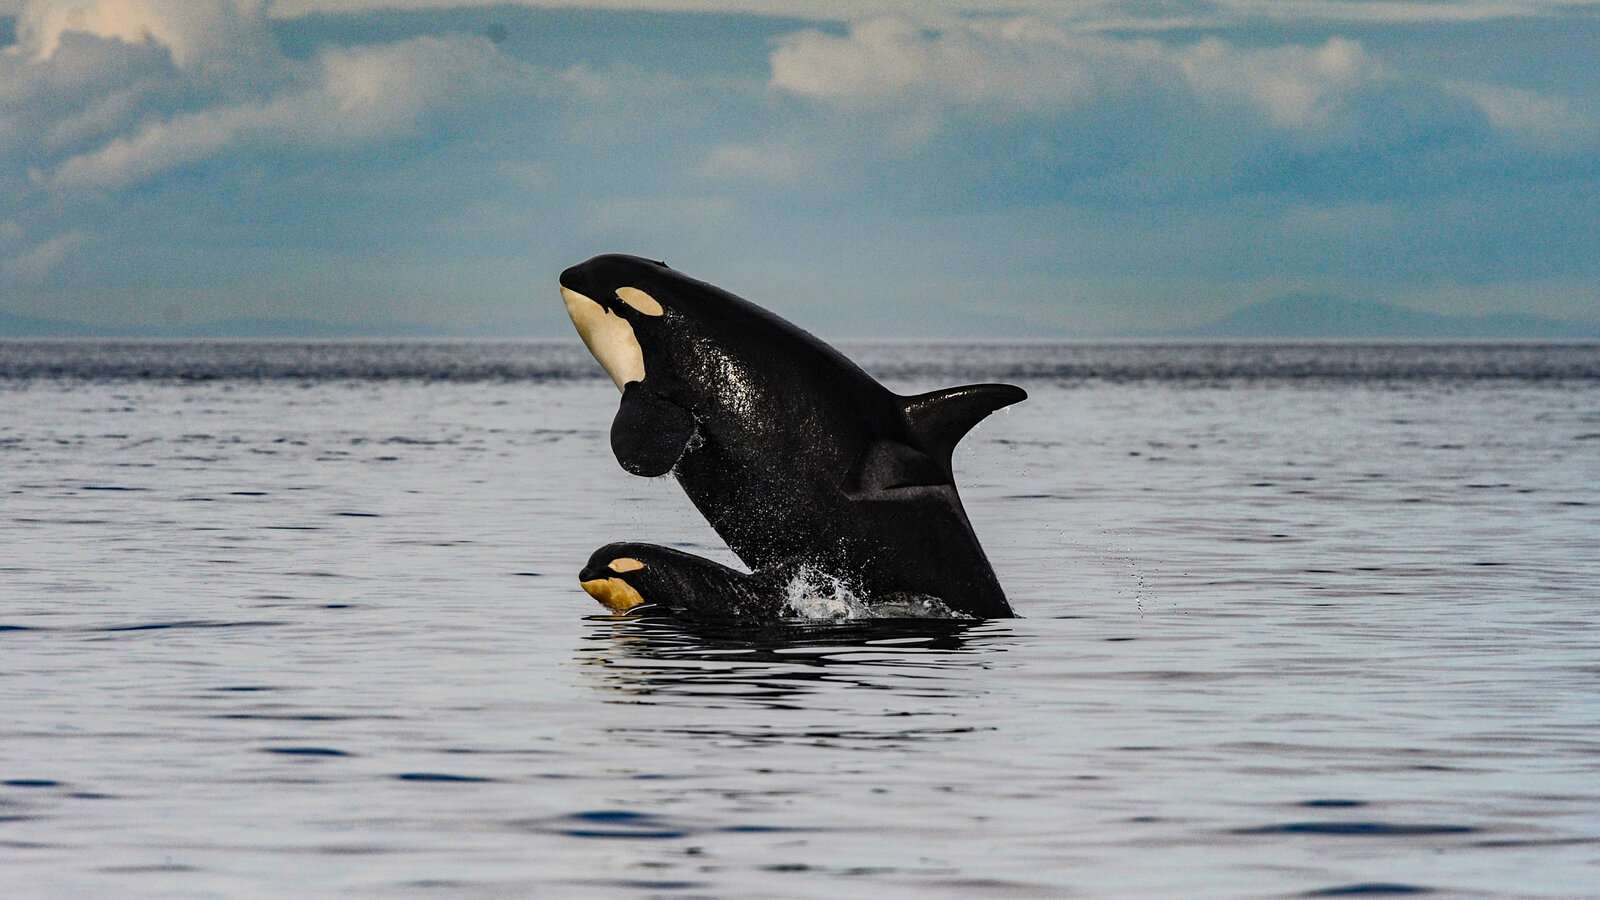 Orca moms pay a high price to feed large adult sons